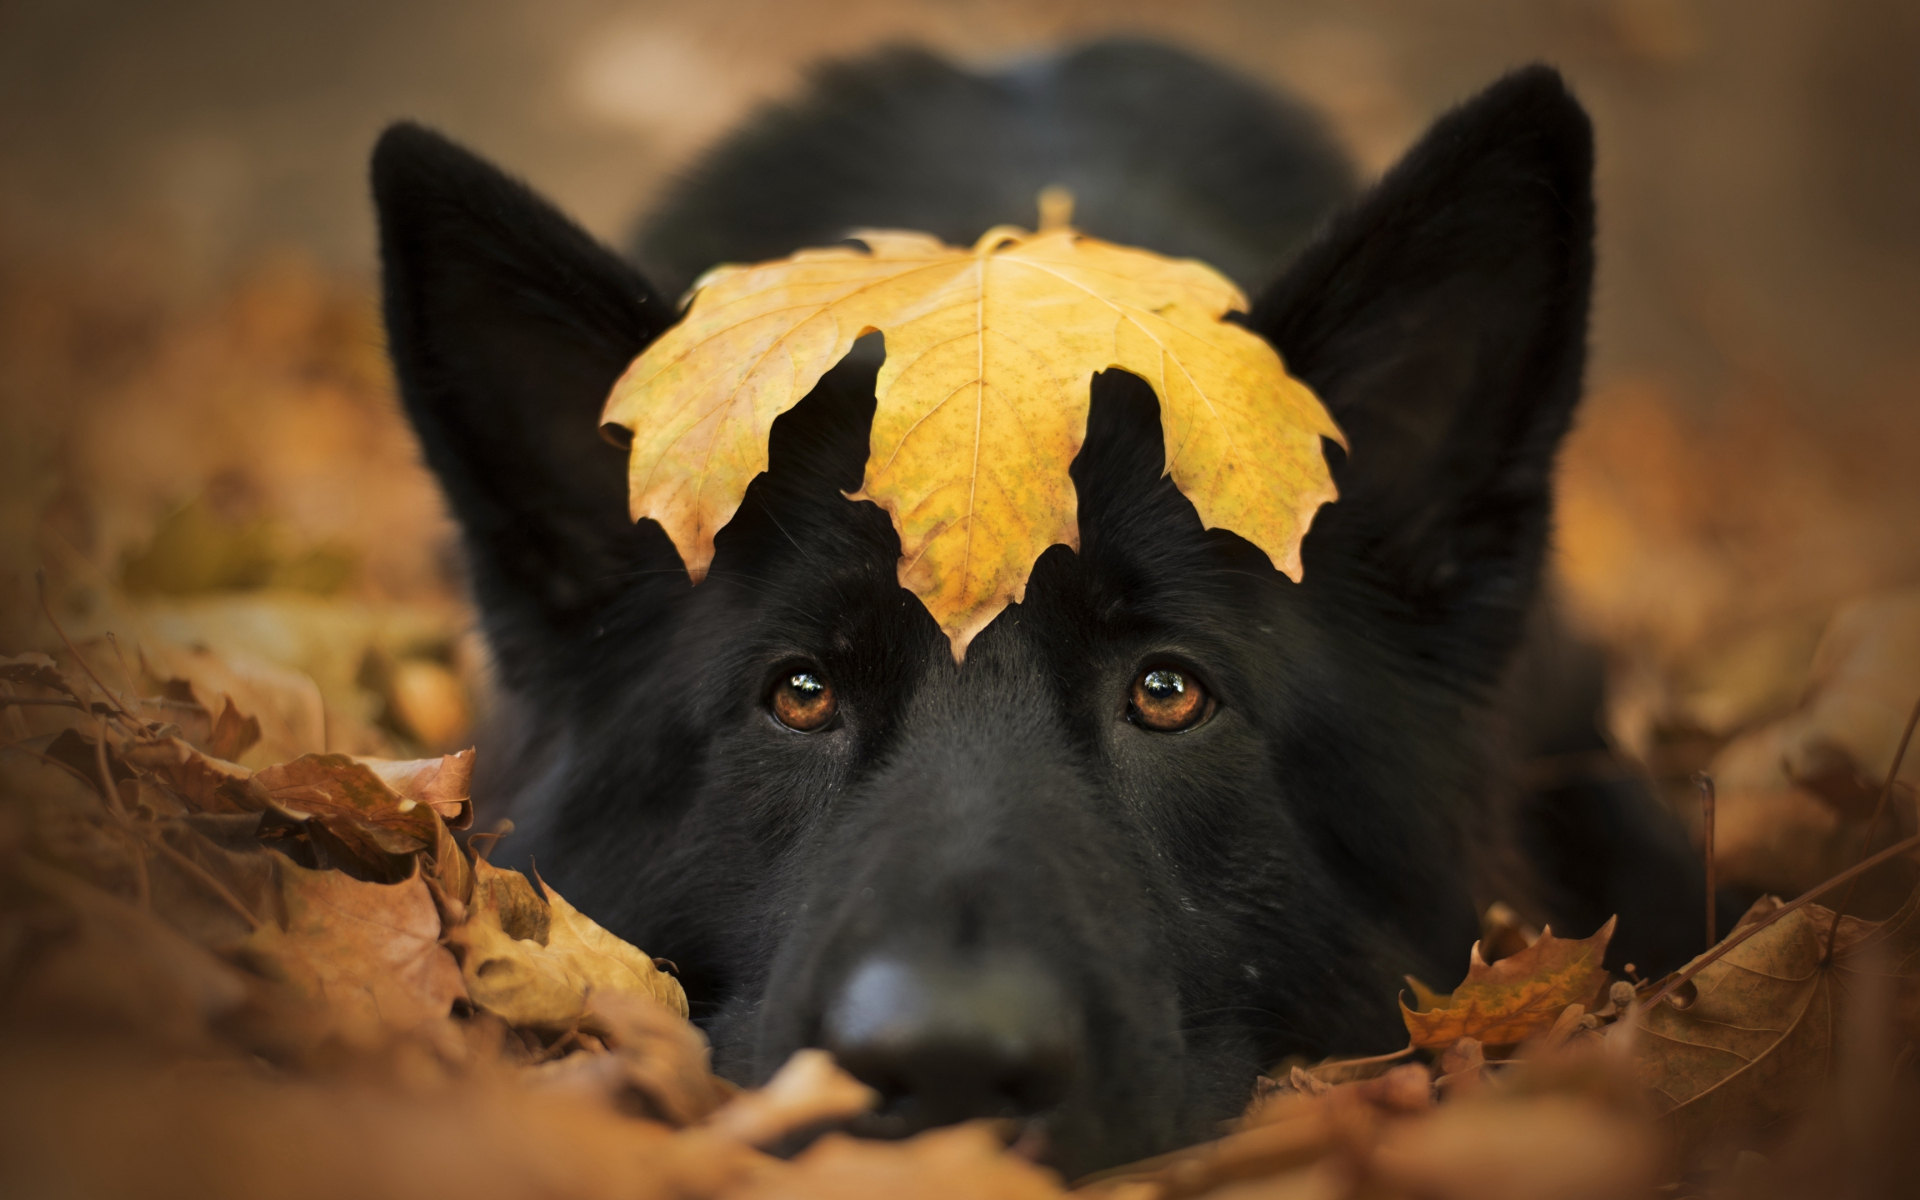 Dog and autumn, cute stare, close up, 1920x1200 wallpaper